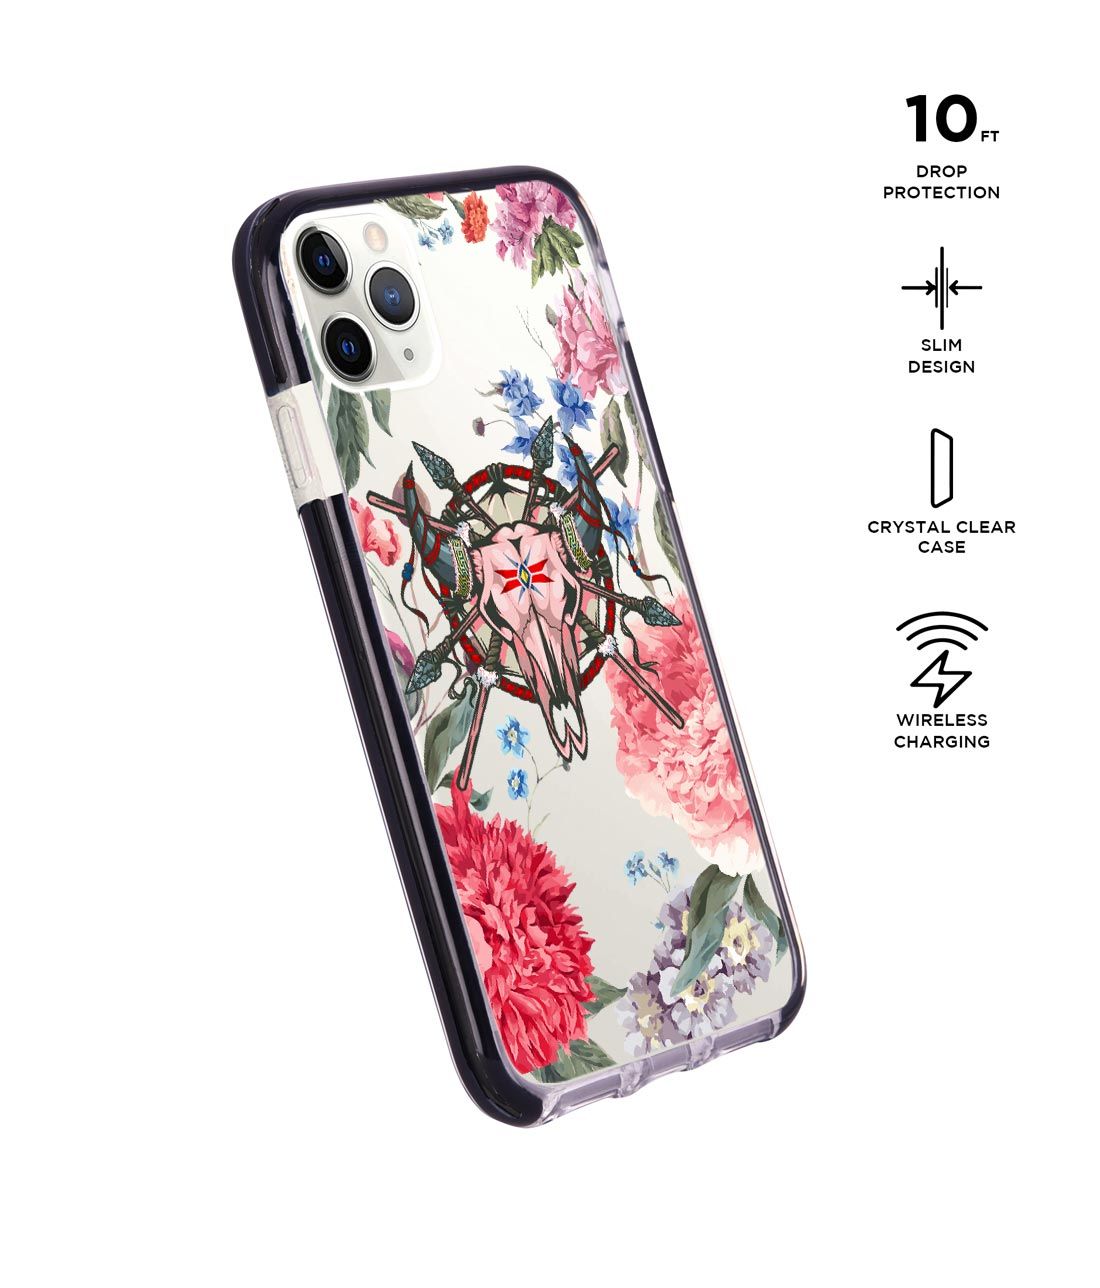 Floral Symmetry - Extreme Phone Case for iPhone 11 Pro